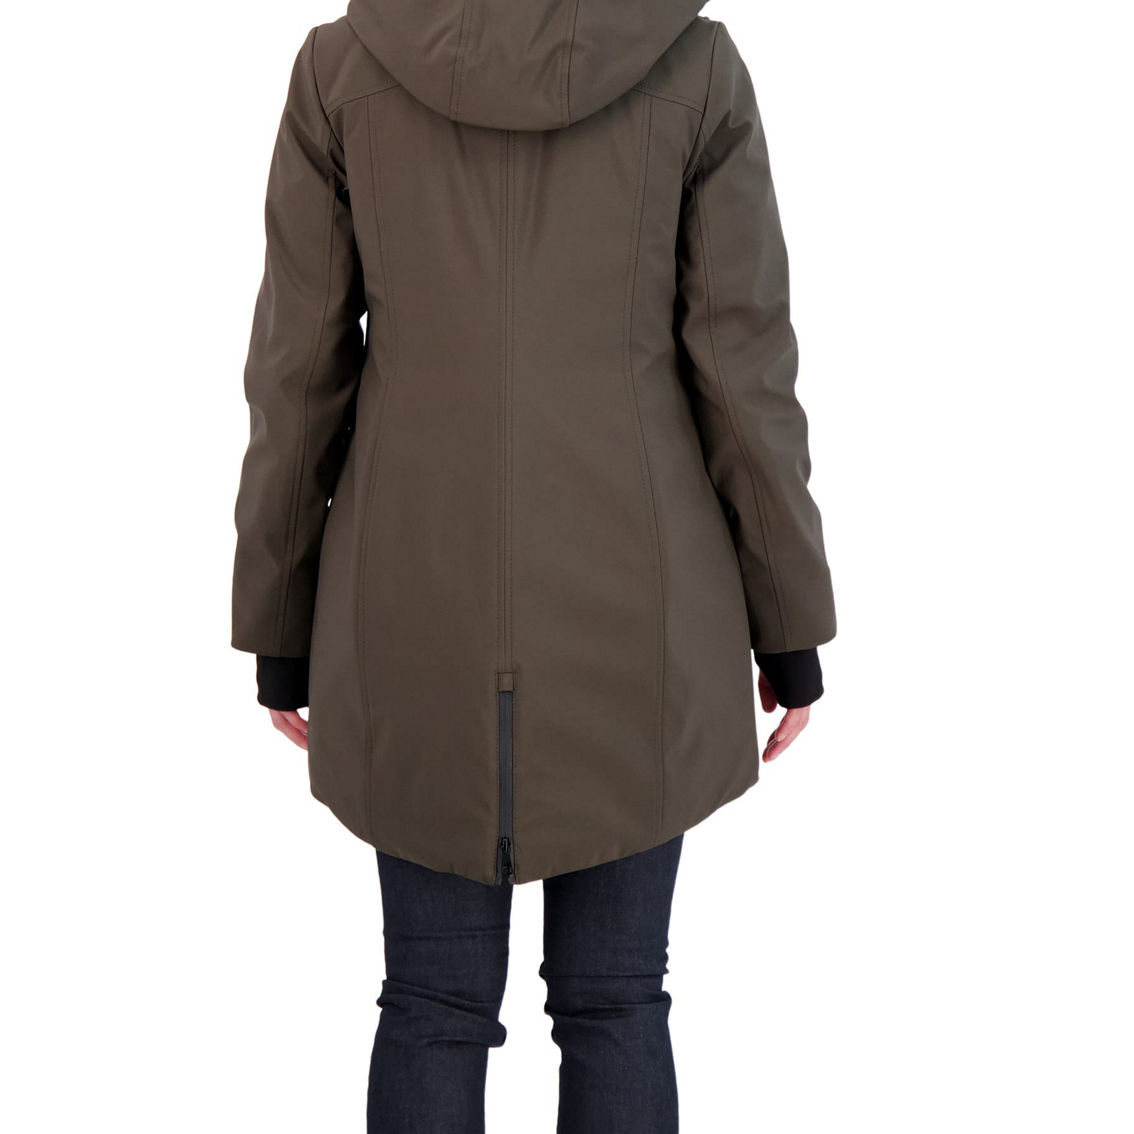 Sebby Collection Women's Heavyweight Softshell Coat - Image 2 of 3